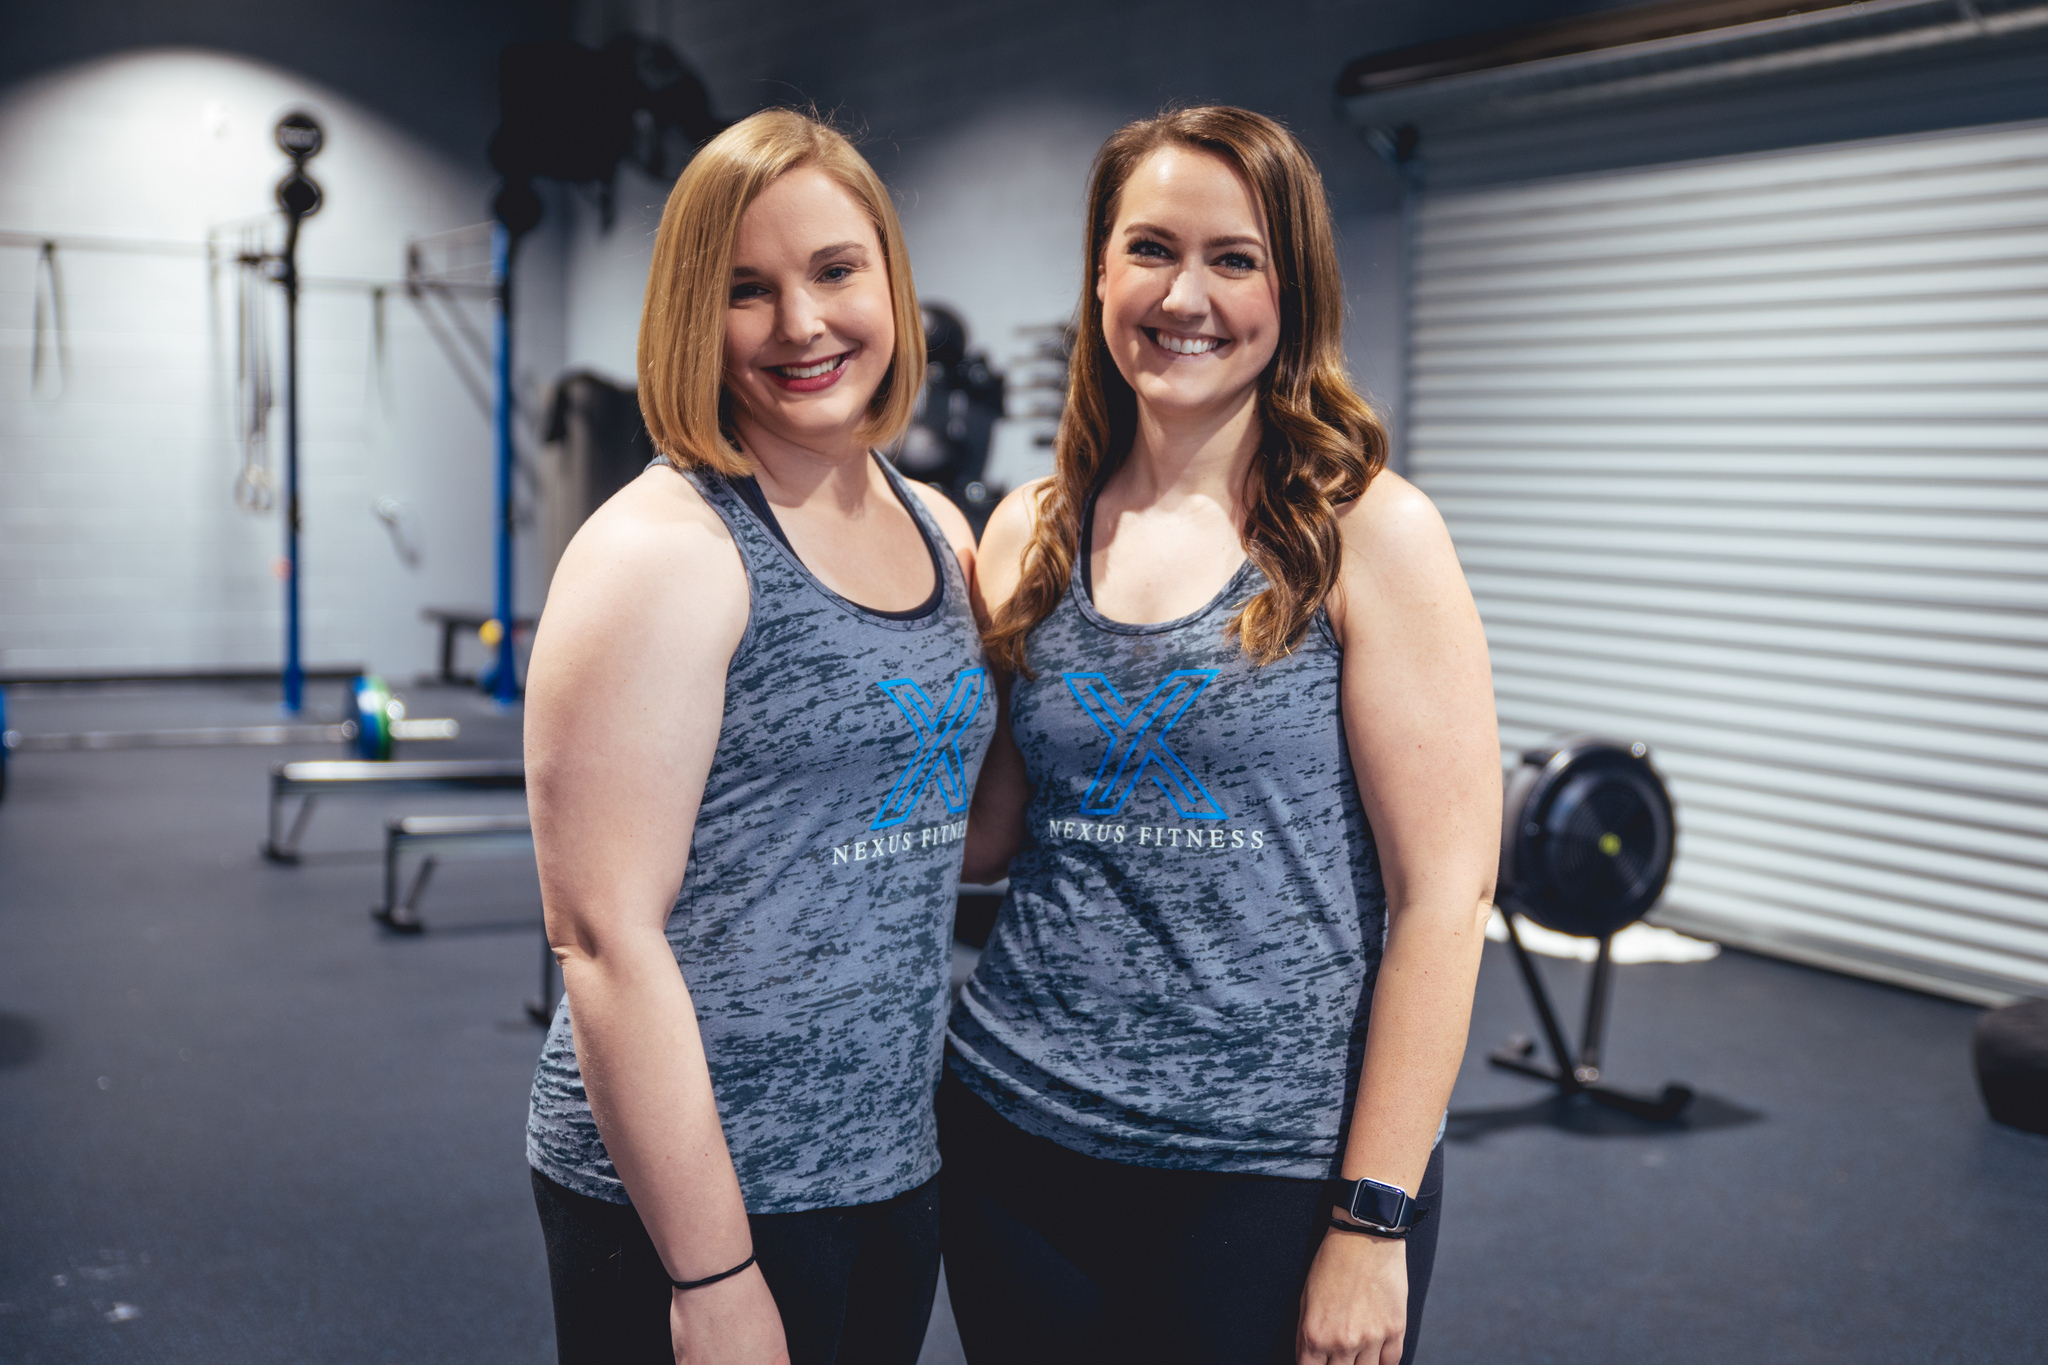 Leigh Bray Anne Ward 5 ways Nexus Fitness is changing the way people get fit including a holistic health program and a January promo!